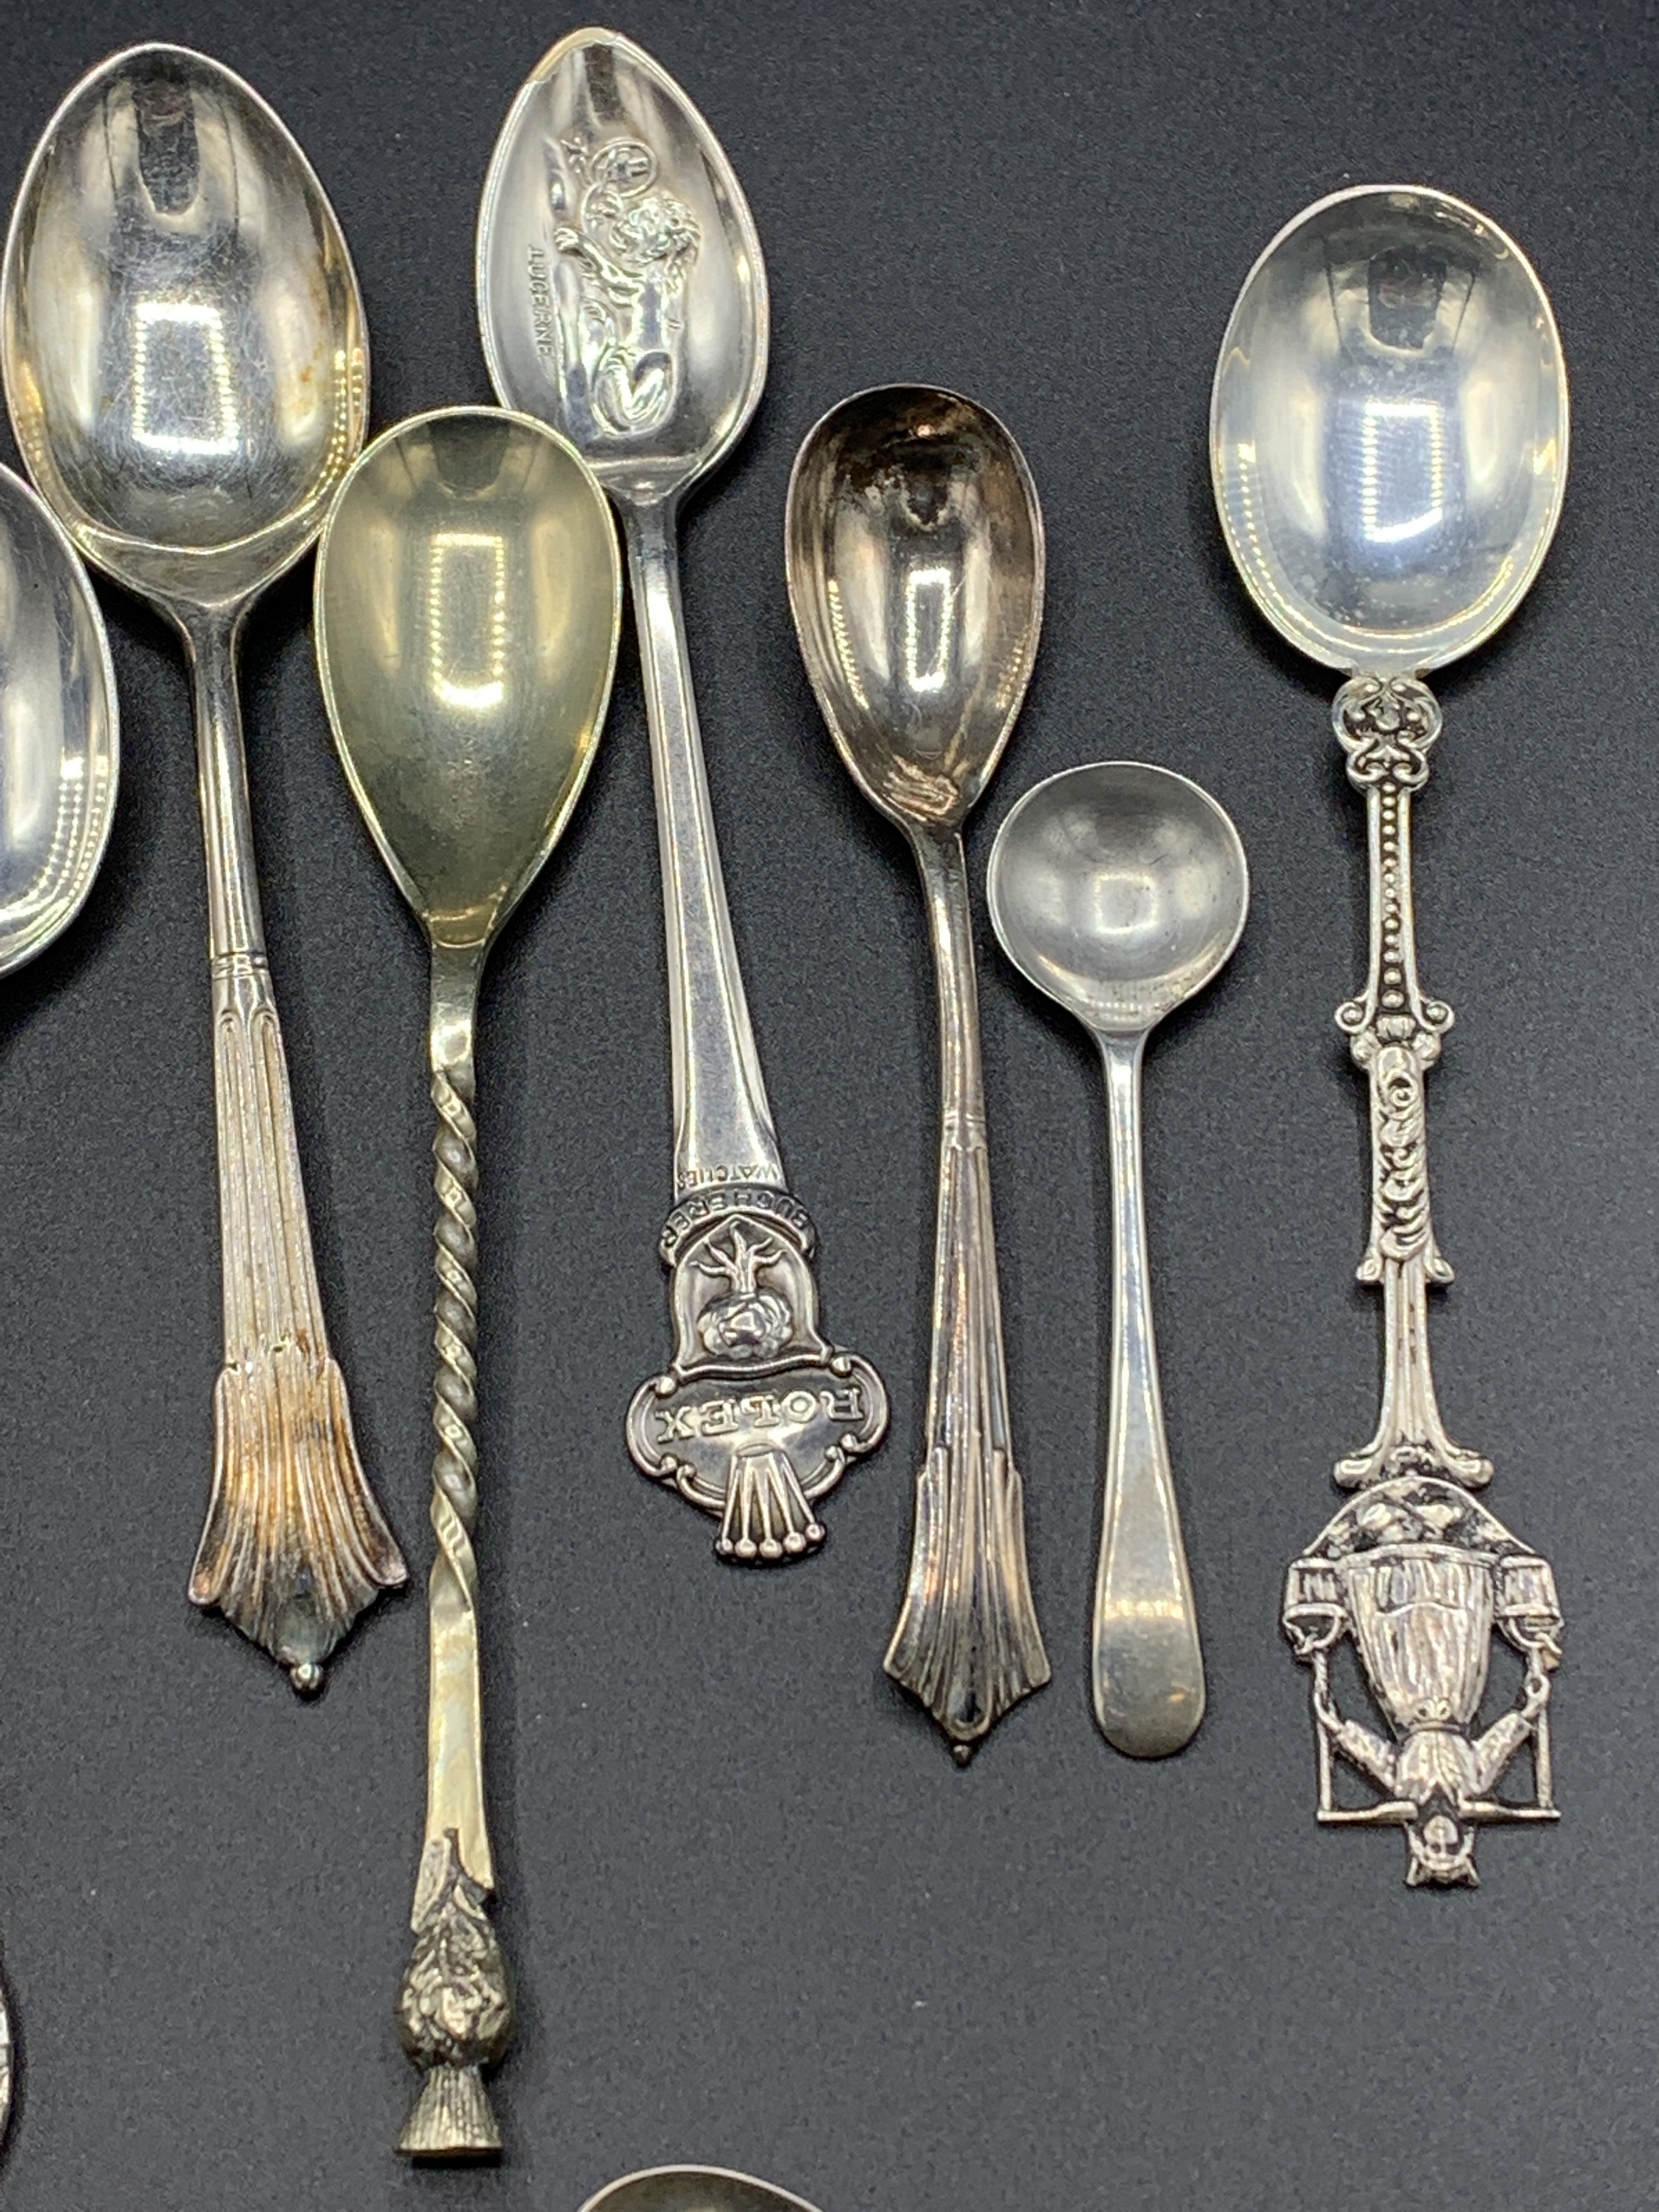 Four silver condiment spoons, six sterling silver teaspoons, and three silver plated teaspoons - Image 2 of 4